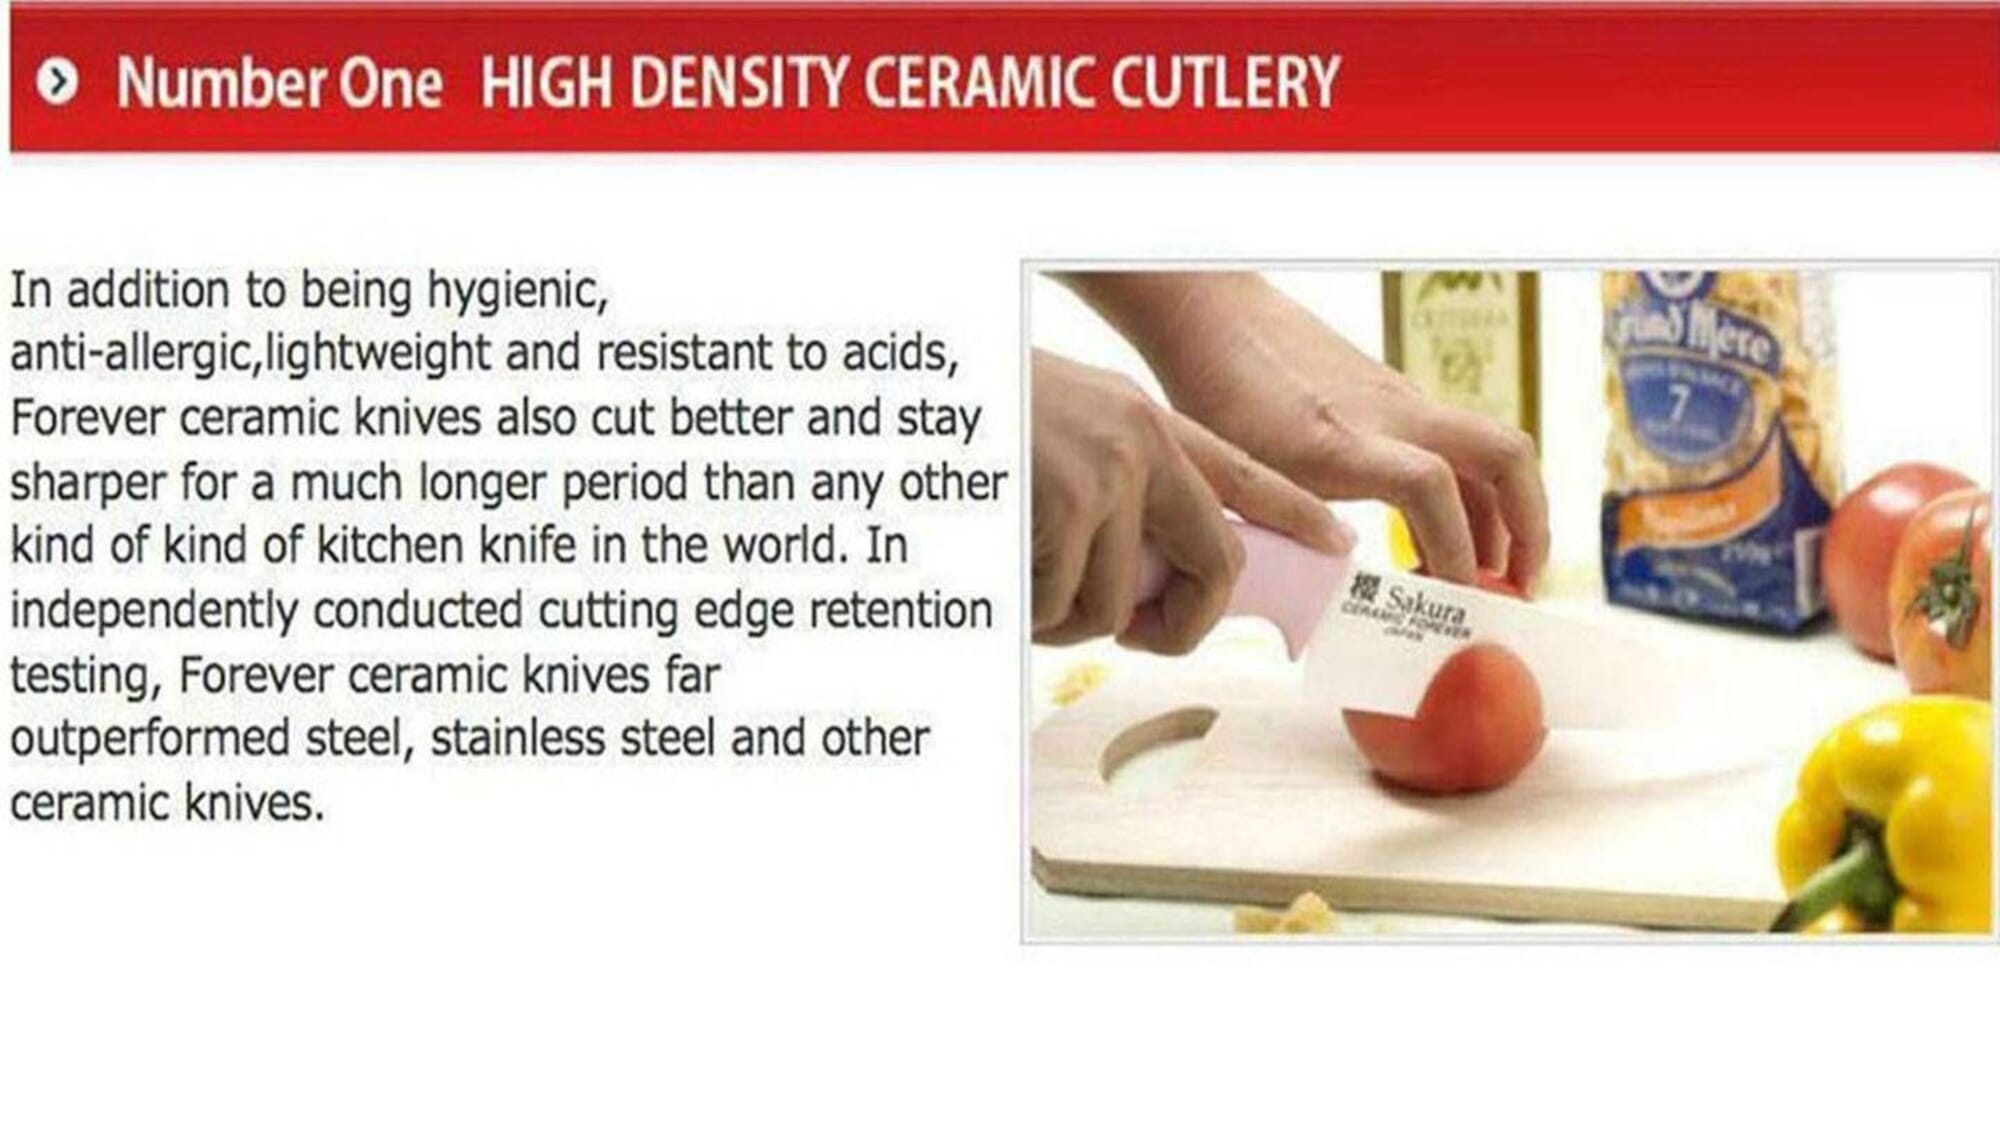 Ceramic and Silicone Knives Stay Sharper Longer